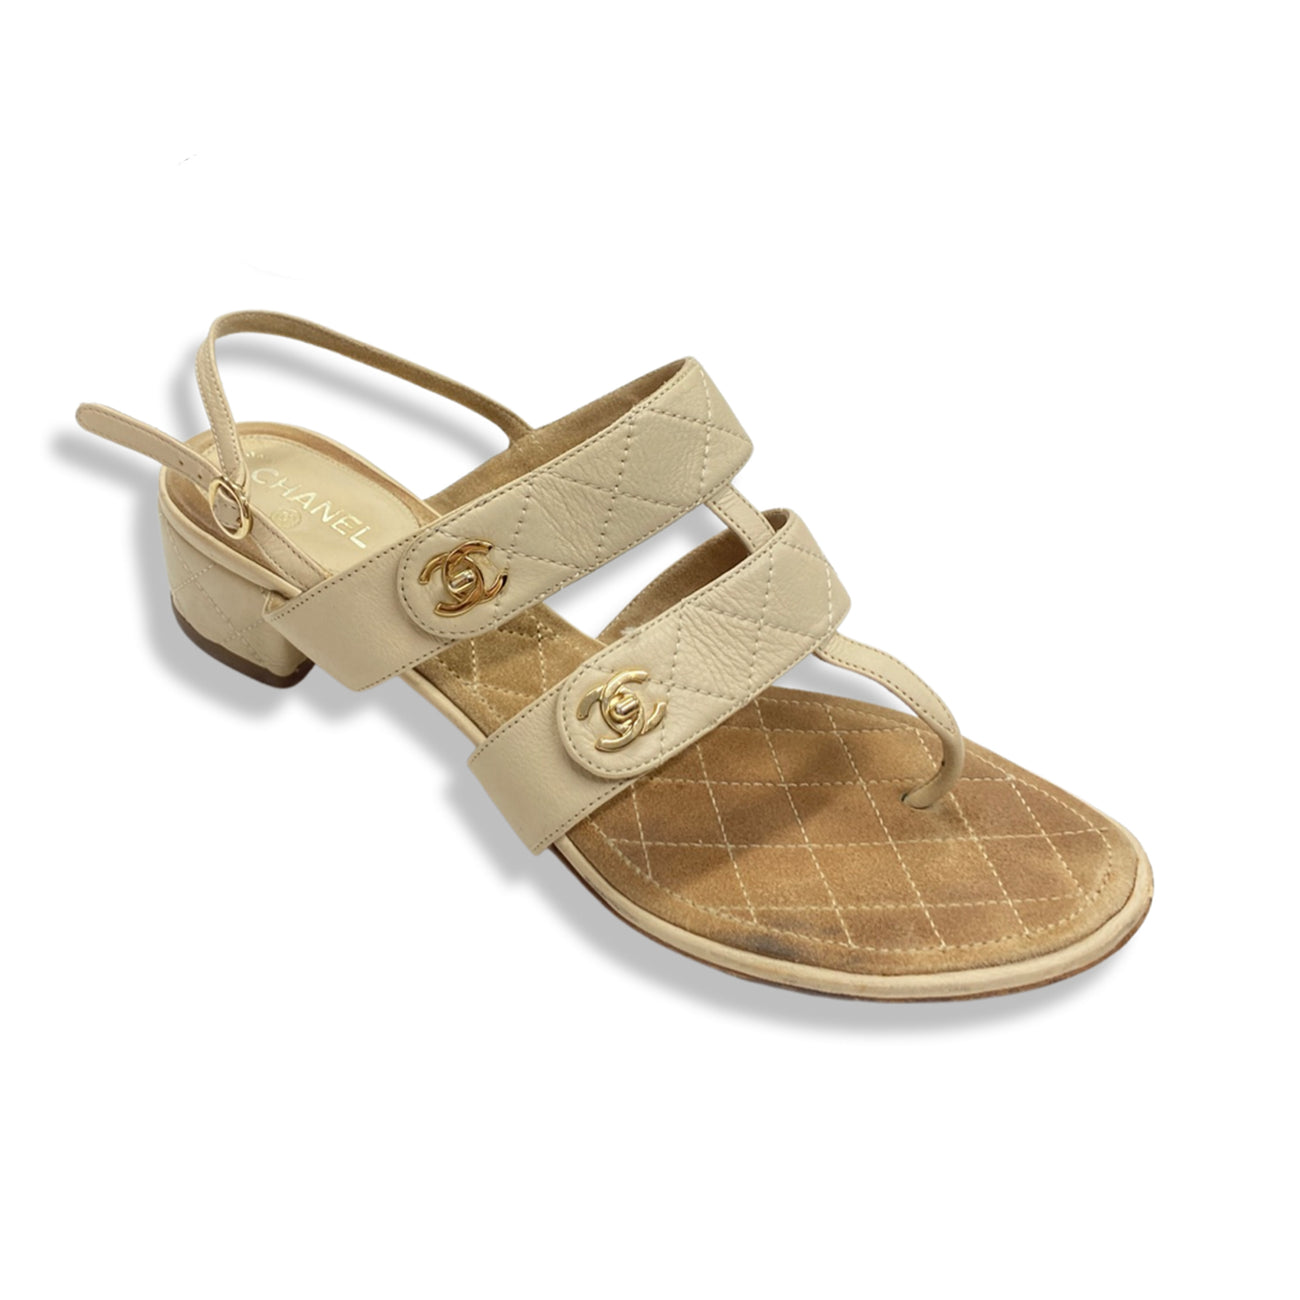 Chanel - Authenticated Sandal - Leather Beige for Women, Never Worn